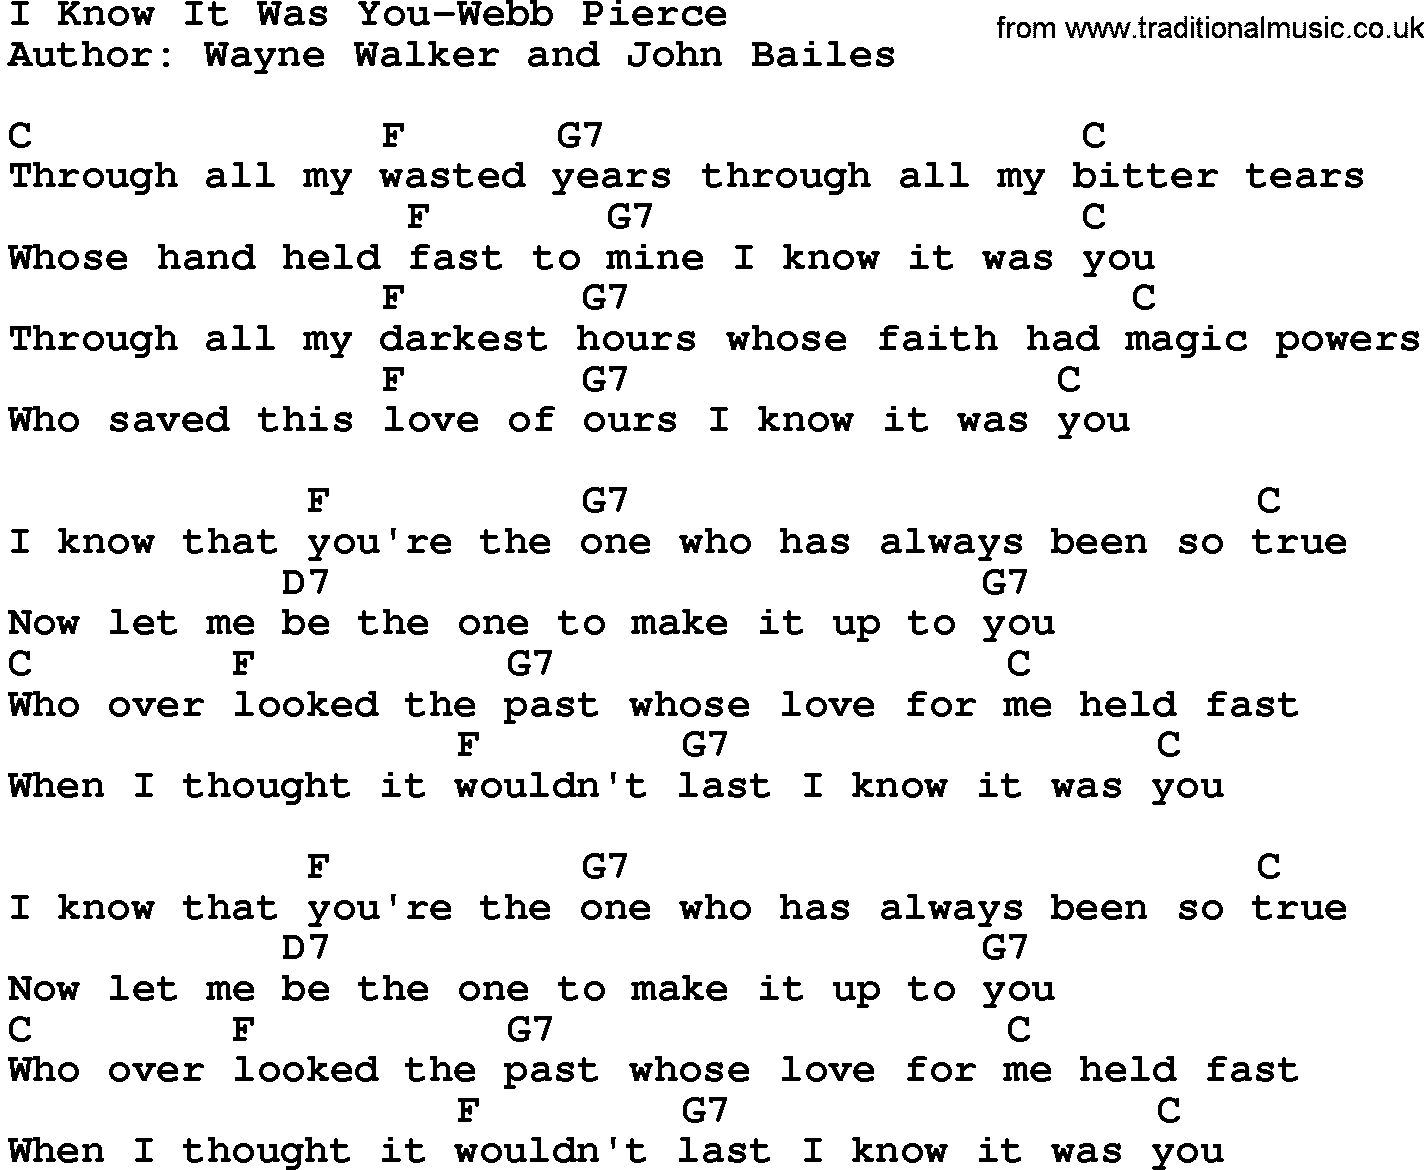 Country music song: I Know It Was You-Webb Pierce lyrics and chords